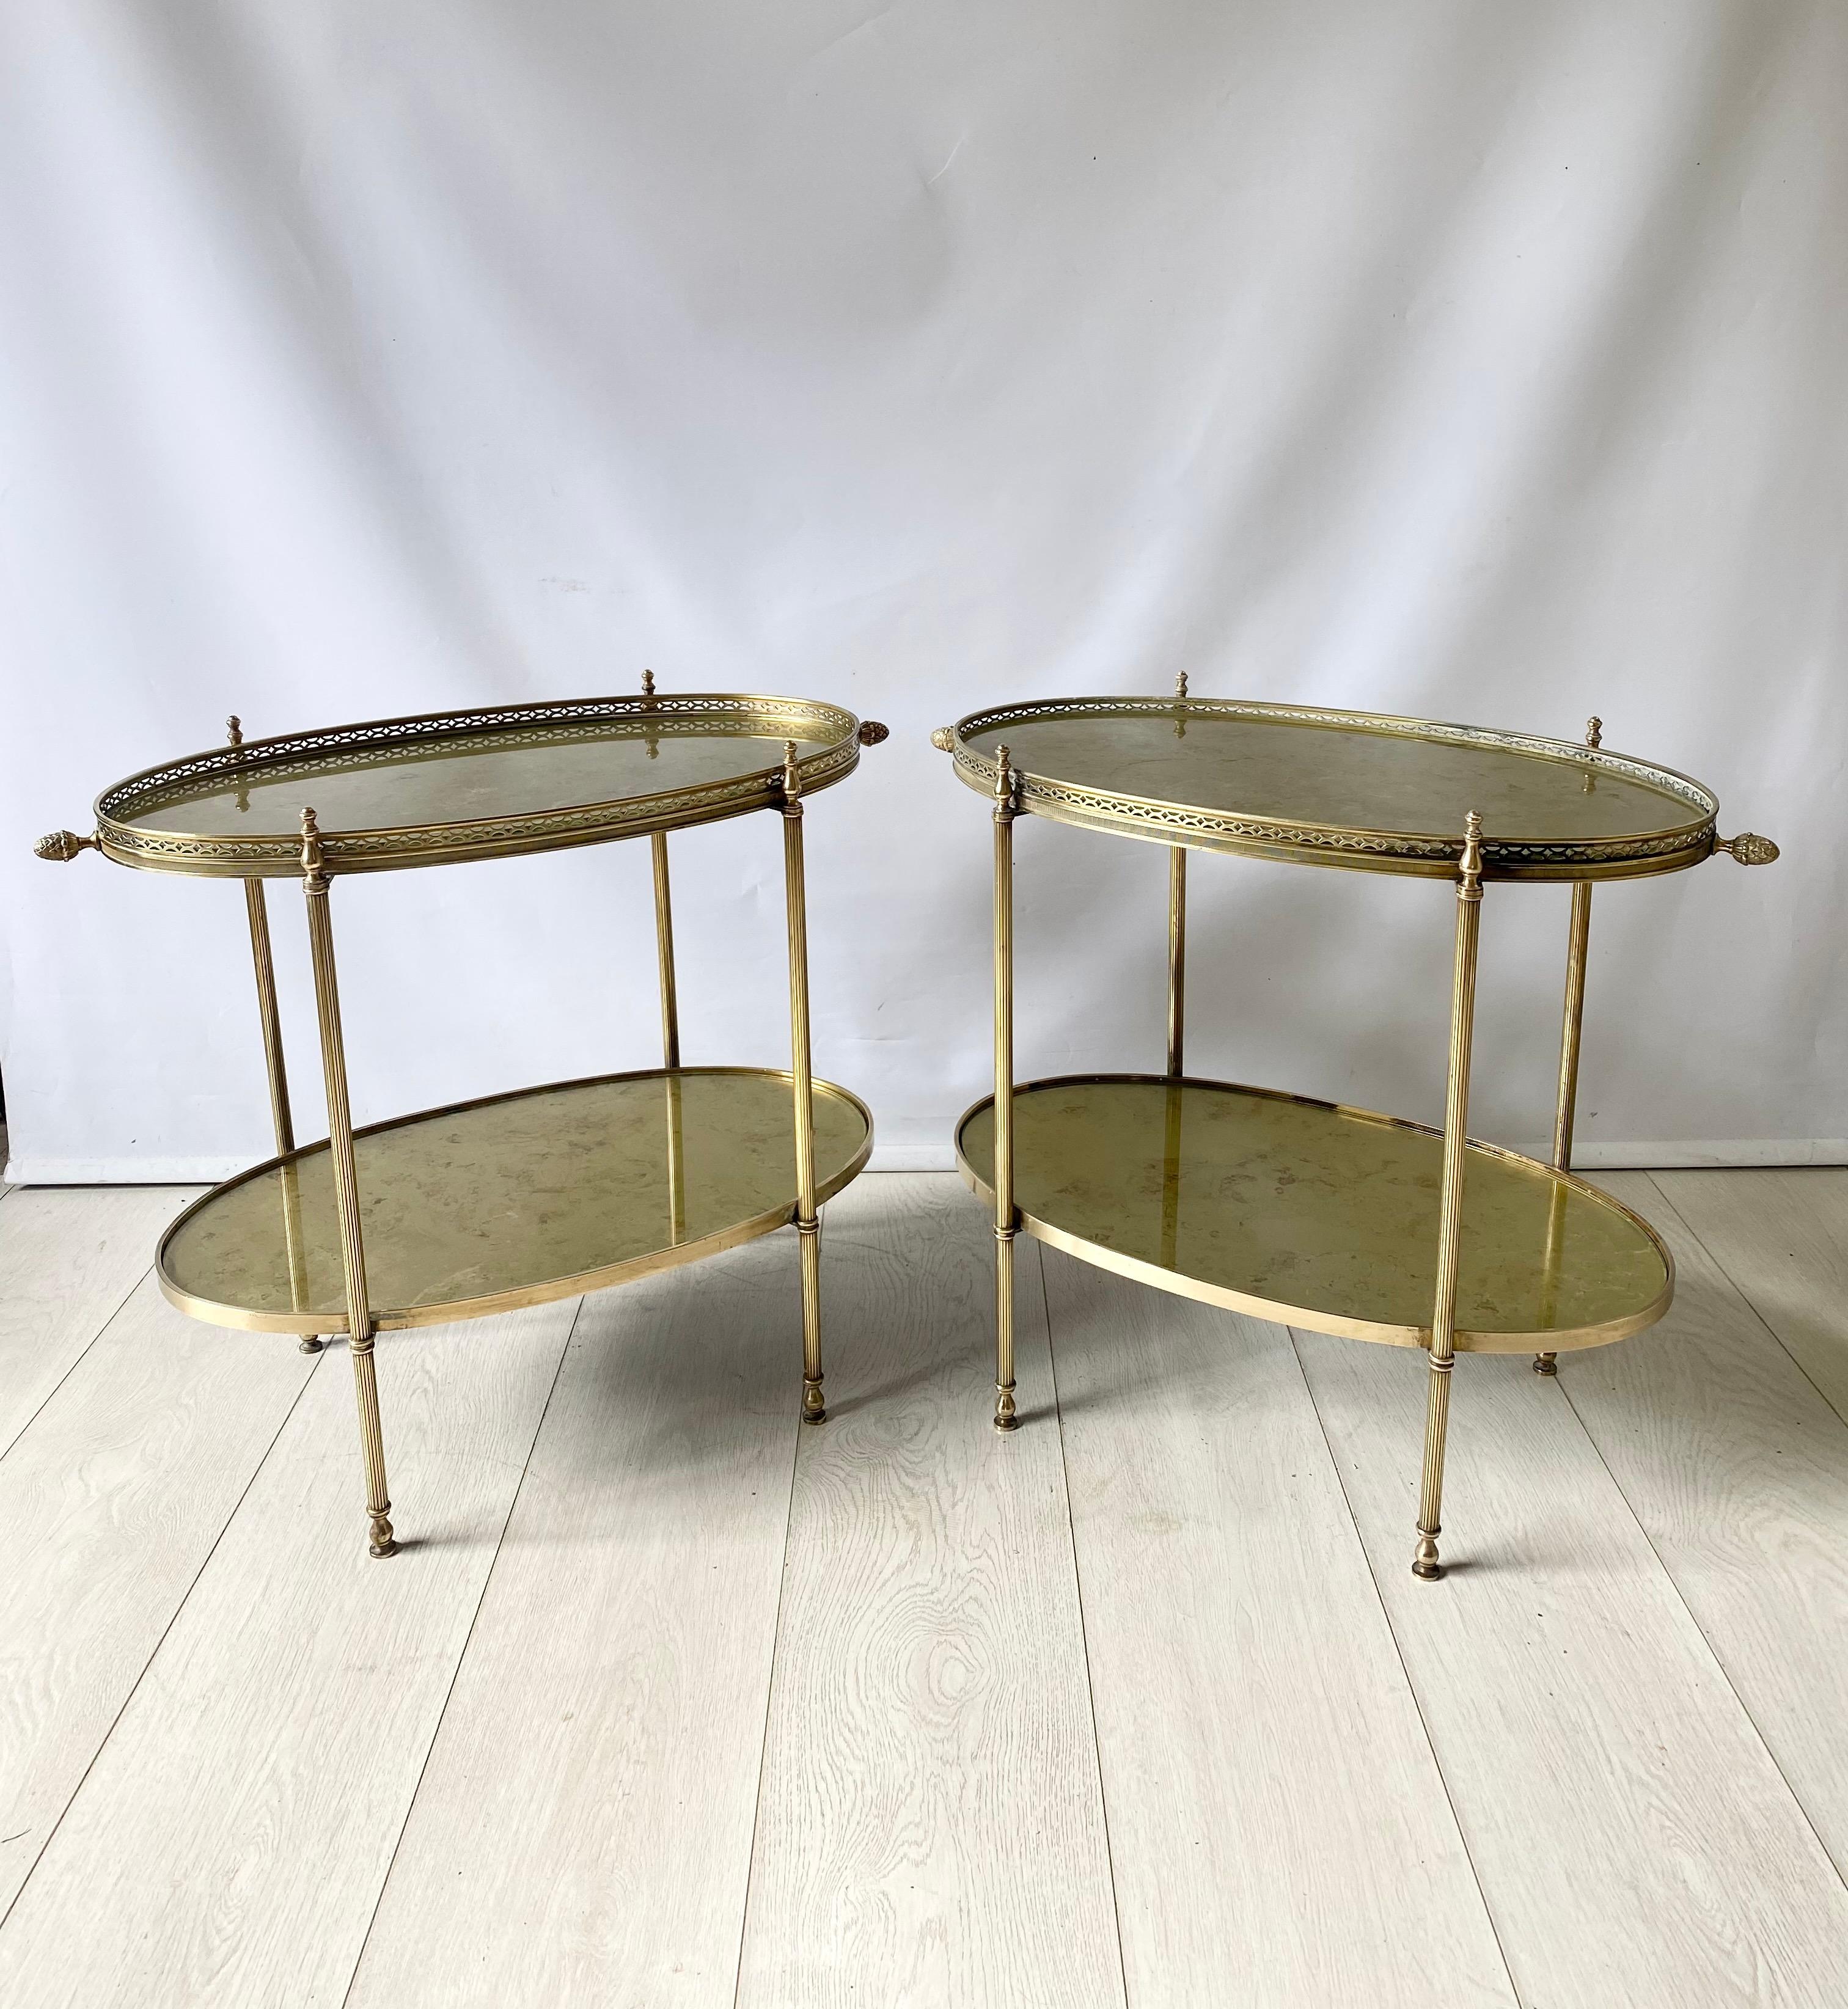 Exceptional pair of vintage brass side tables from France

Decorative finials to the sides, with golden eglomise glass tops

Top tray measures 53.5cm wide, 62cm with finials
31.5cm deep
Stands 49cm to glass, 52cm to finials.